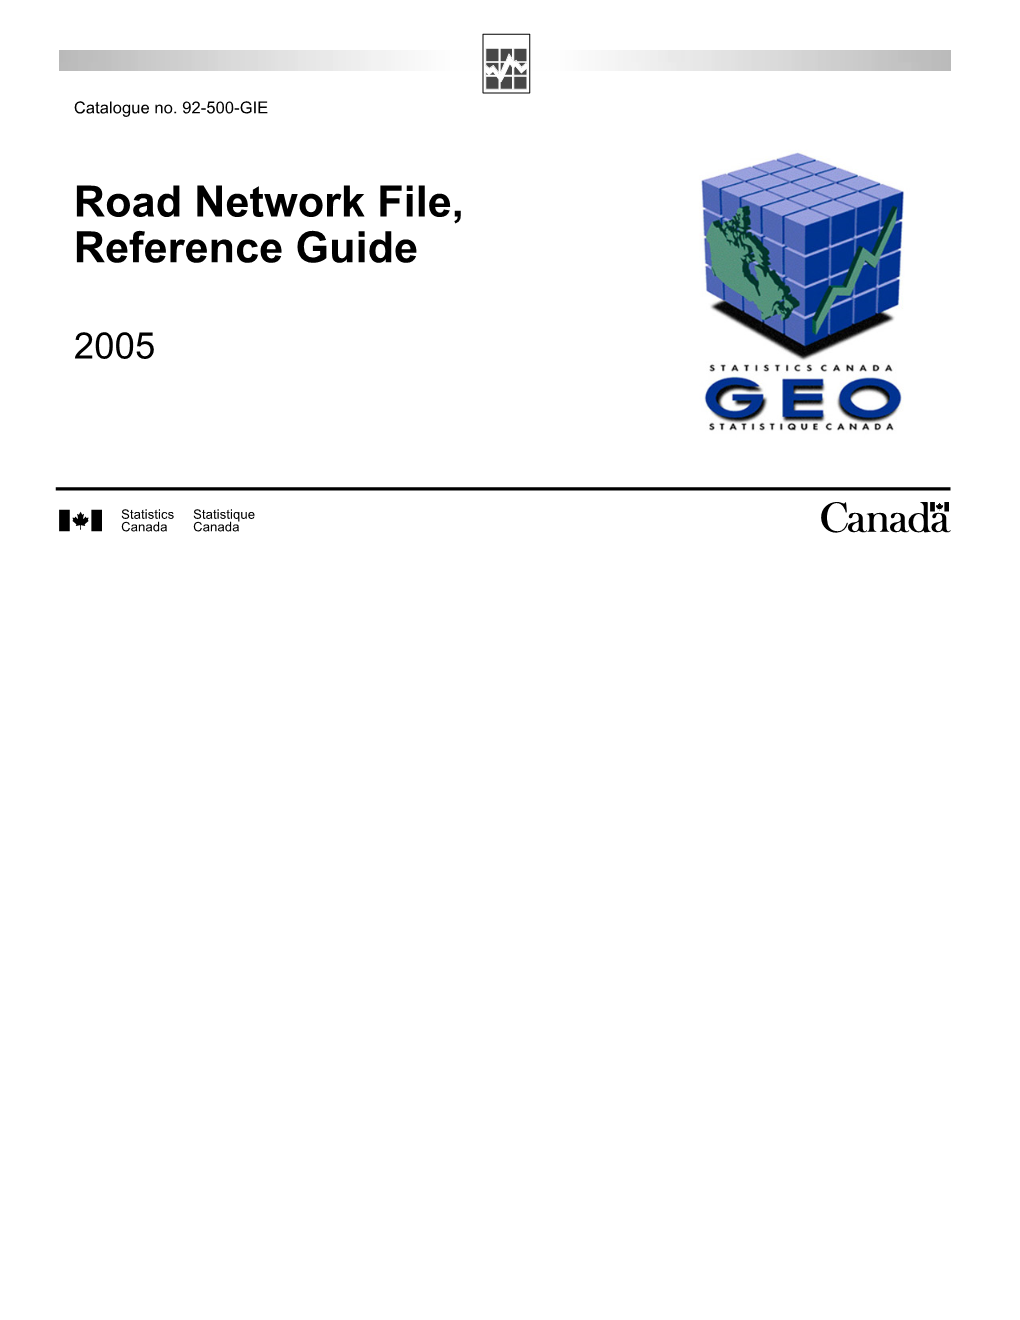 2005 Road Network File Reference Guide